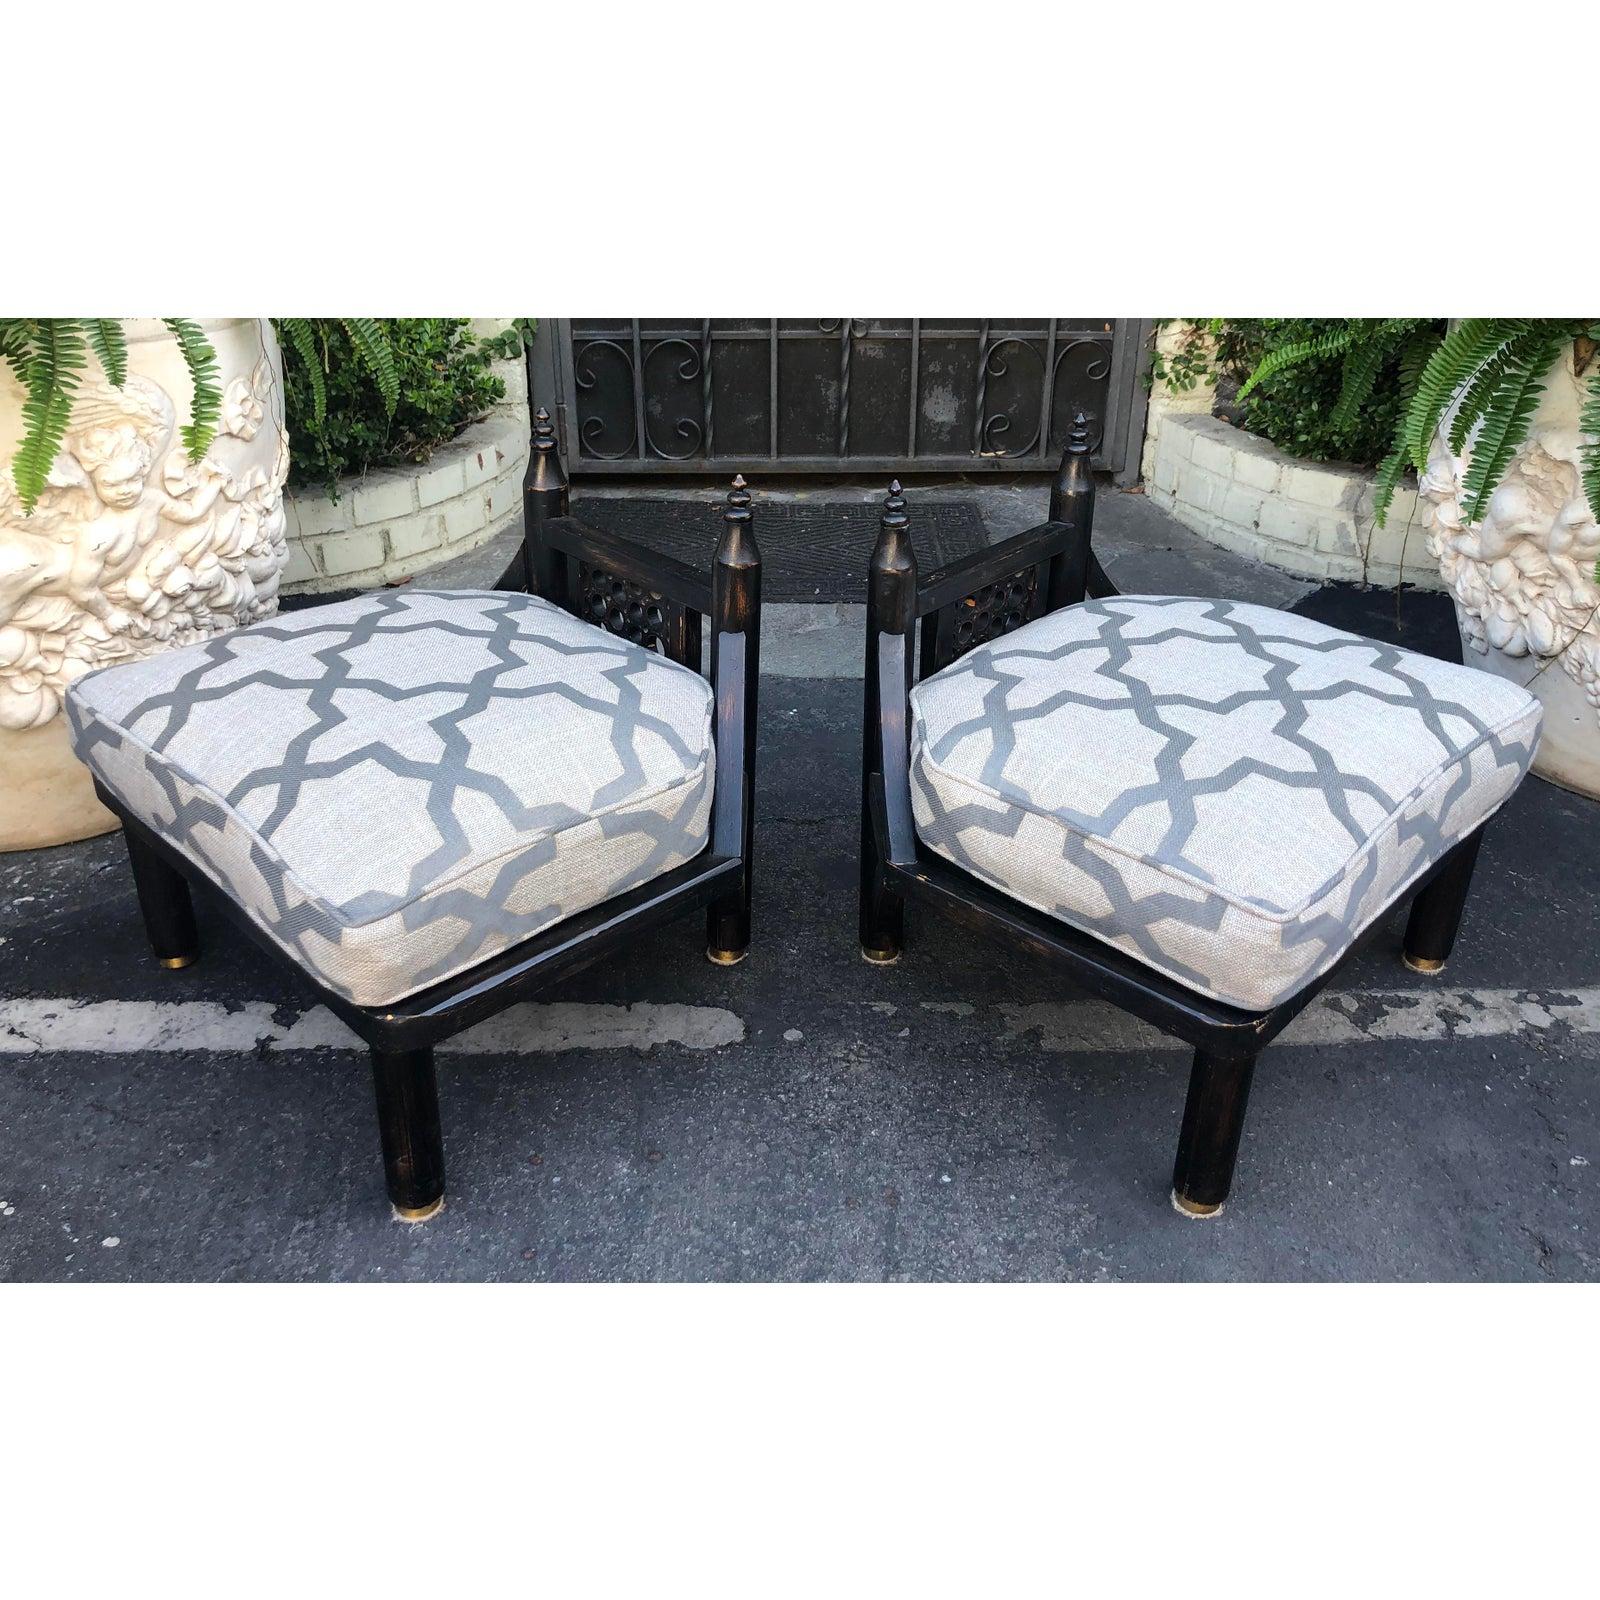 20th Century Unusual Vintage Ritts Co. Mid-Century Modern Black Chinoiserie Low Chairs